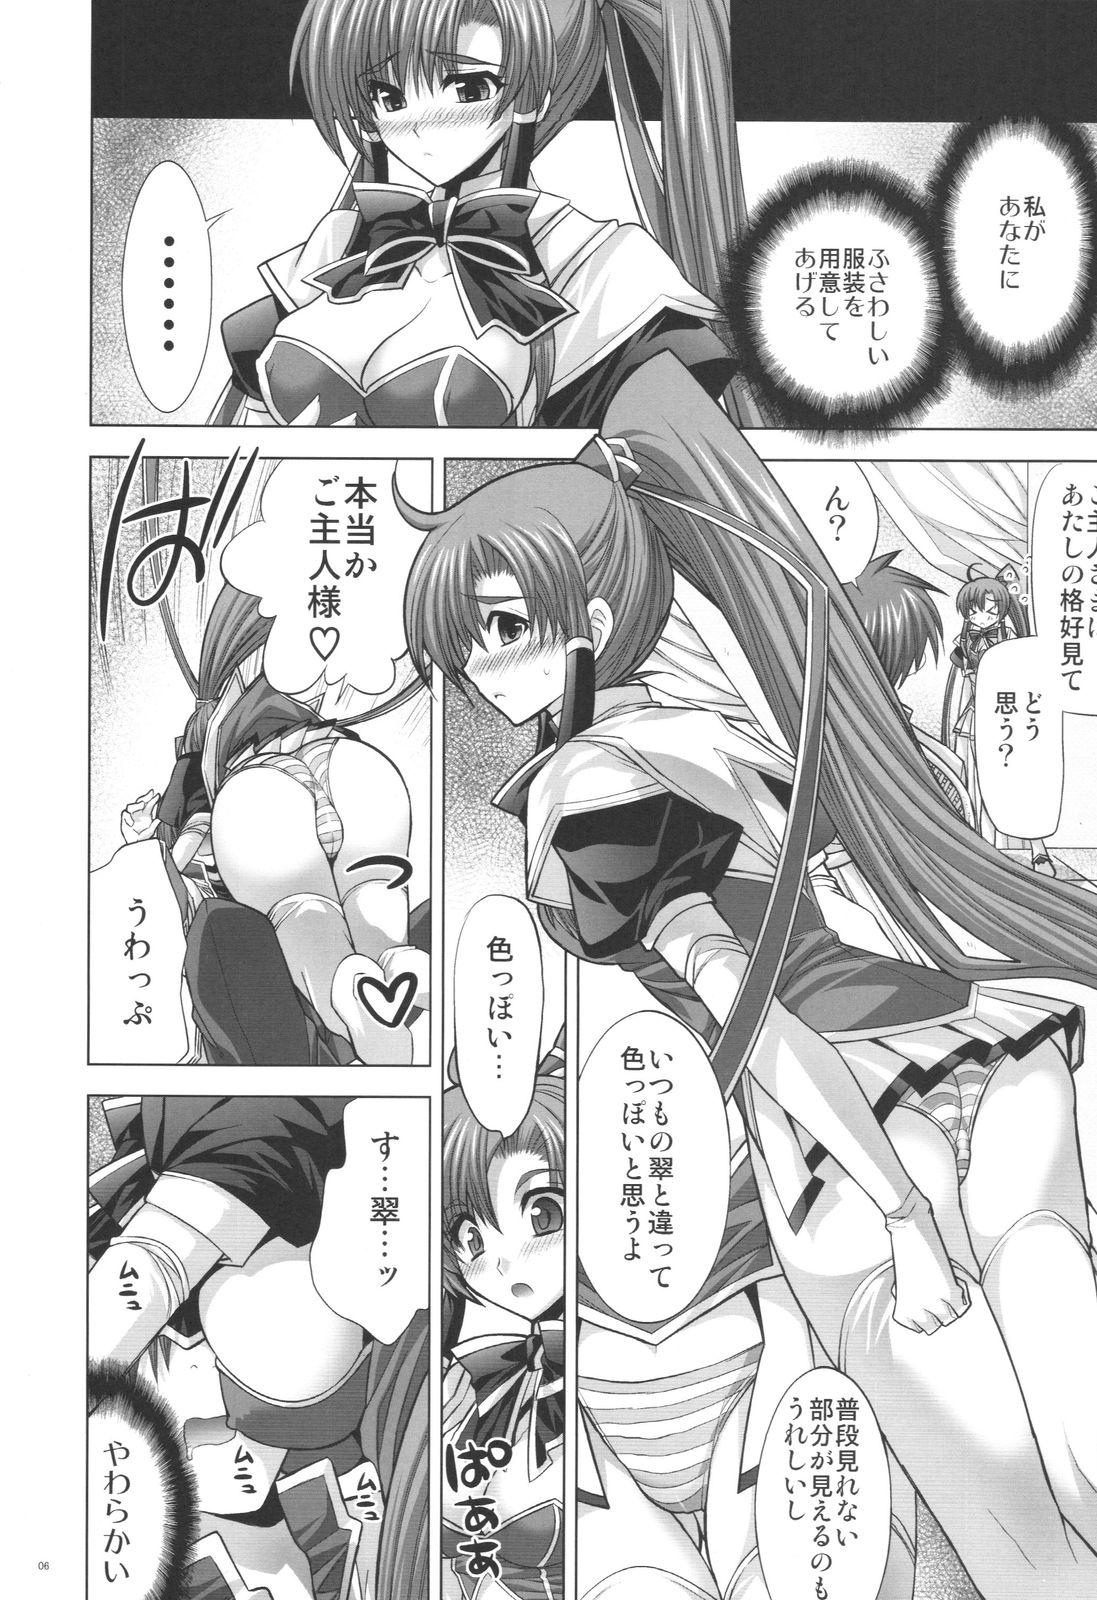 Czech Inconstant - Koihime musou Rough Sex - Page 5